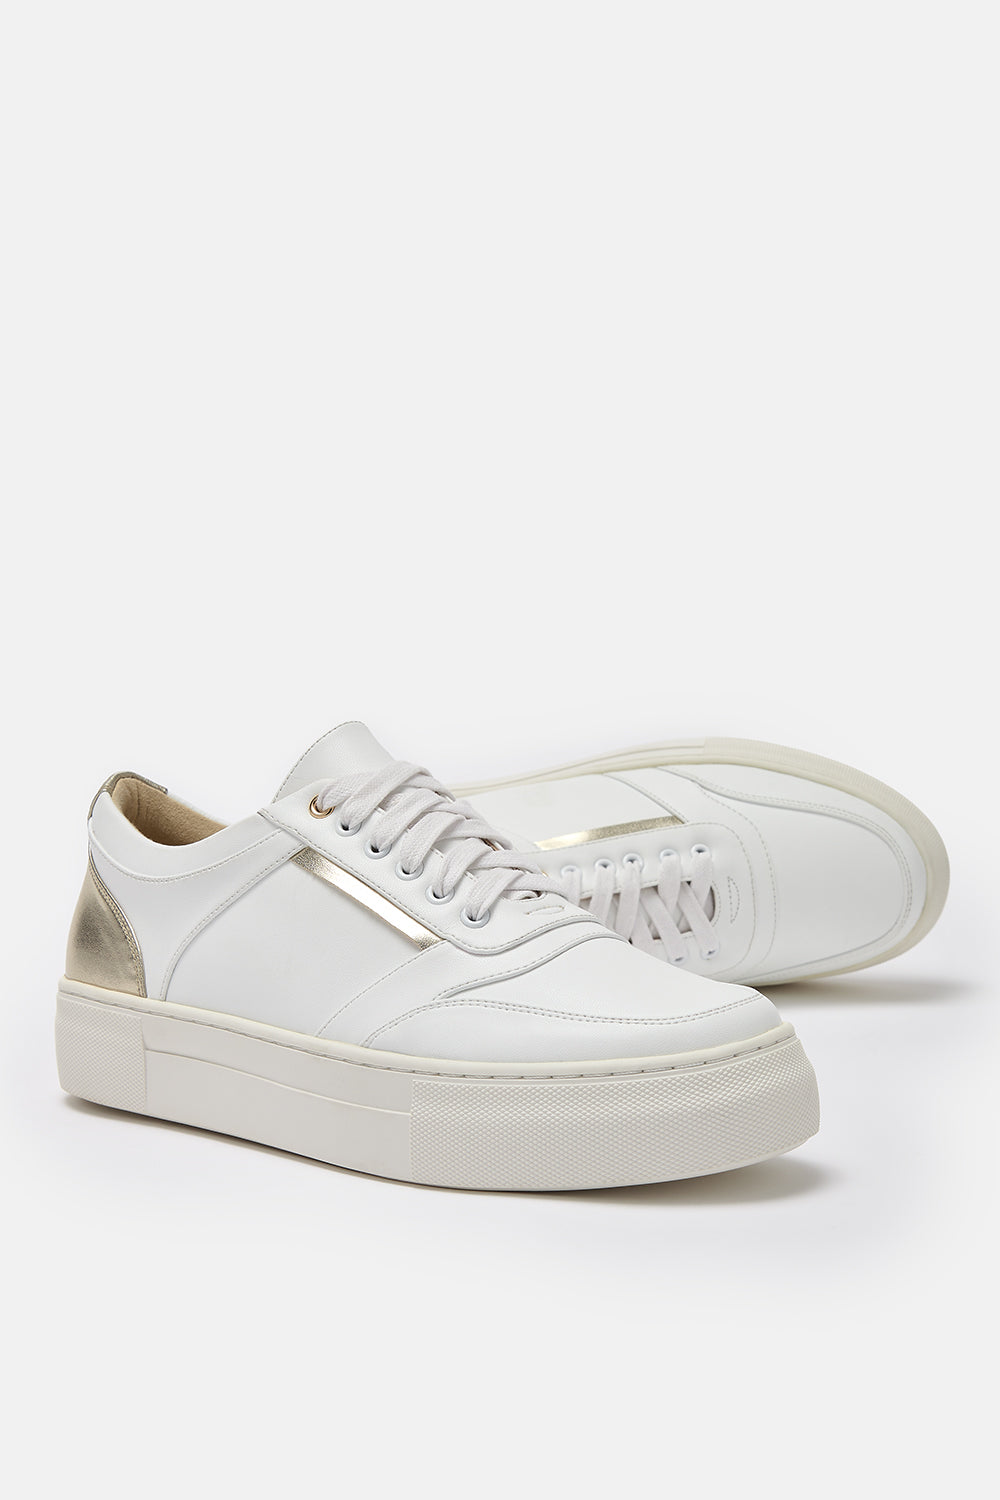 Mila white and gold platform trainers